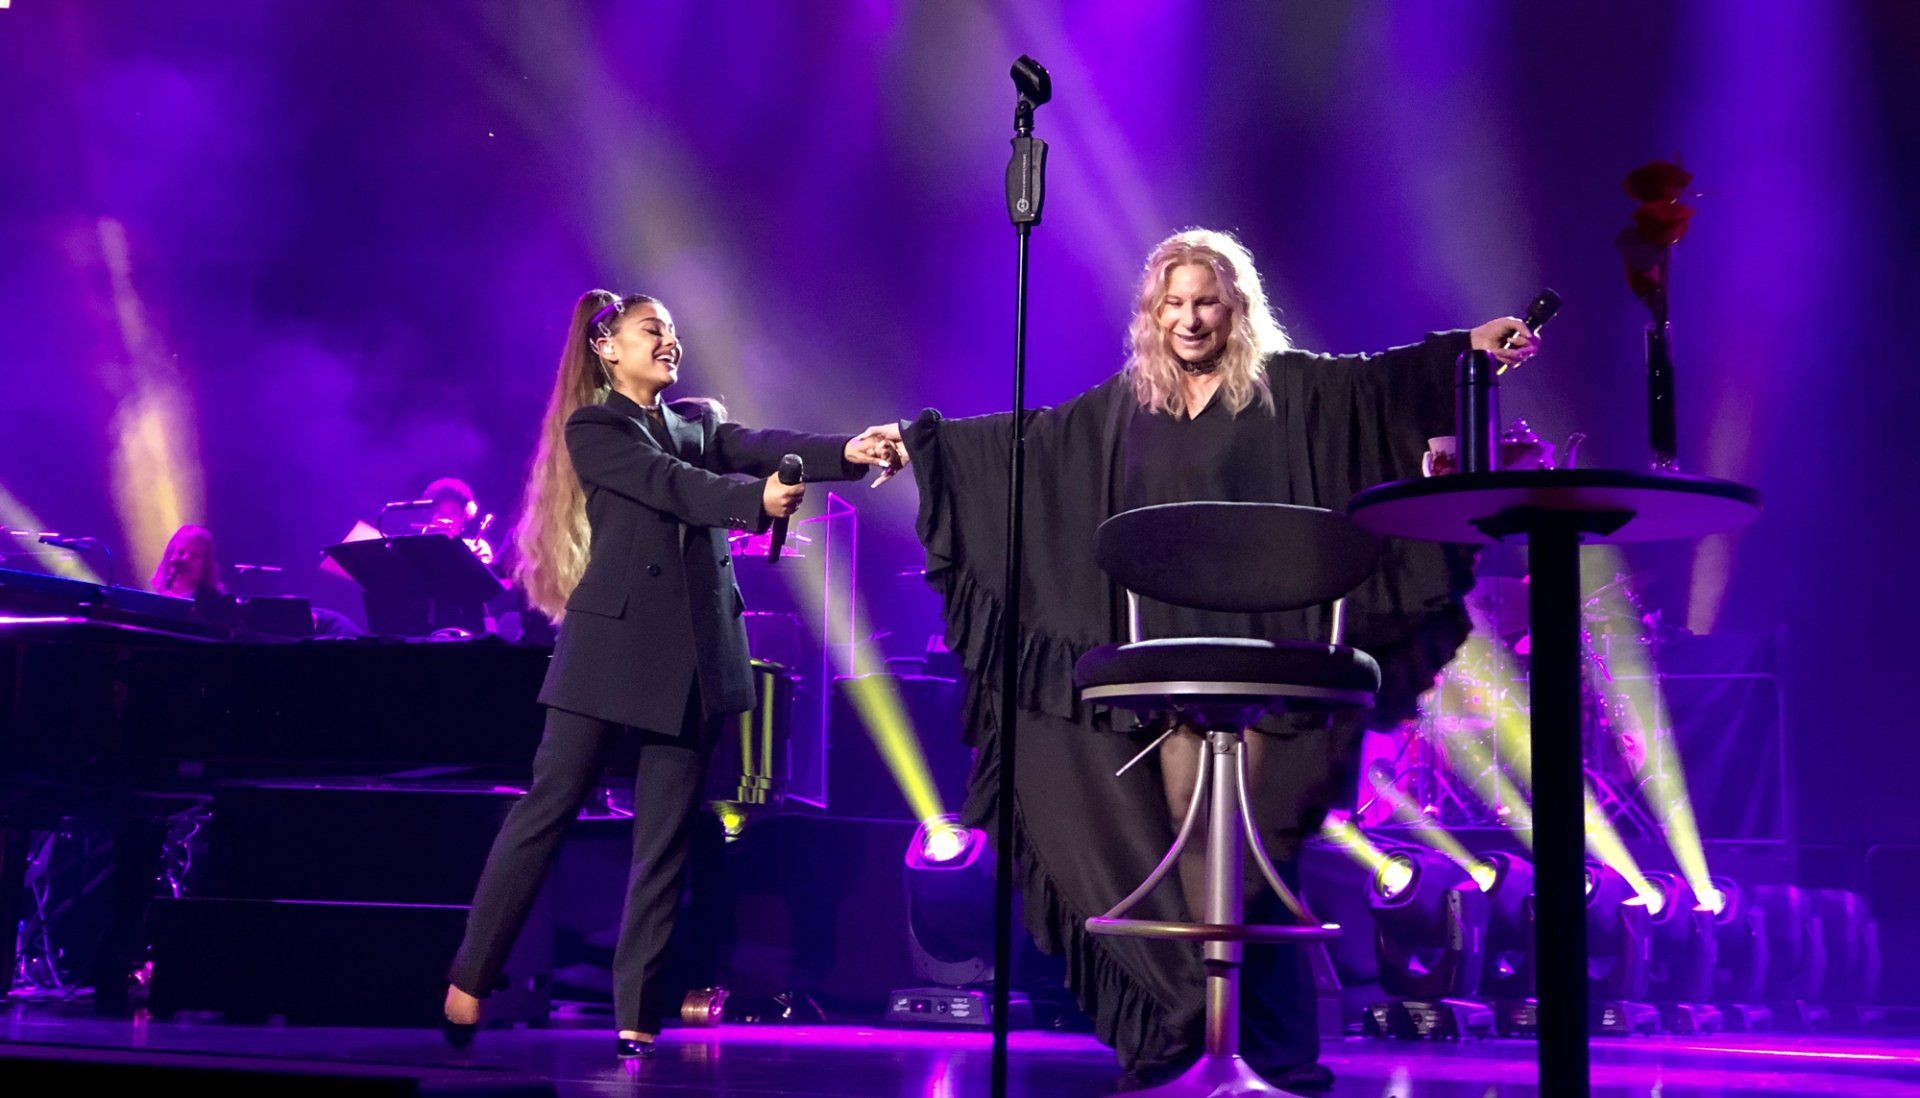 Ariana Grande and Barbra Streisand together on stage in concert in 2019 in Chicago.